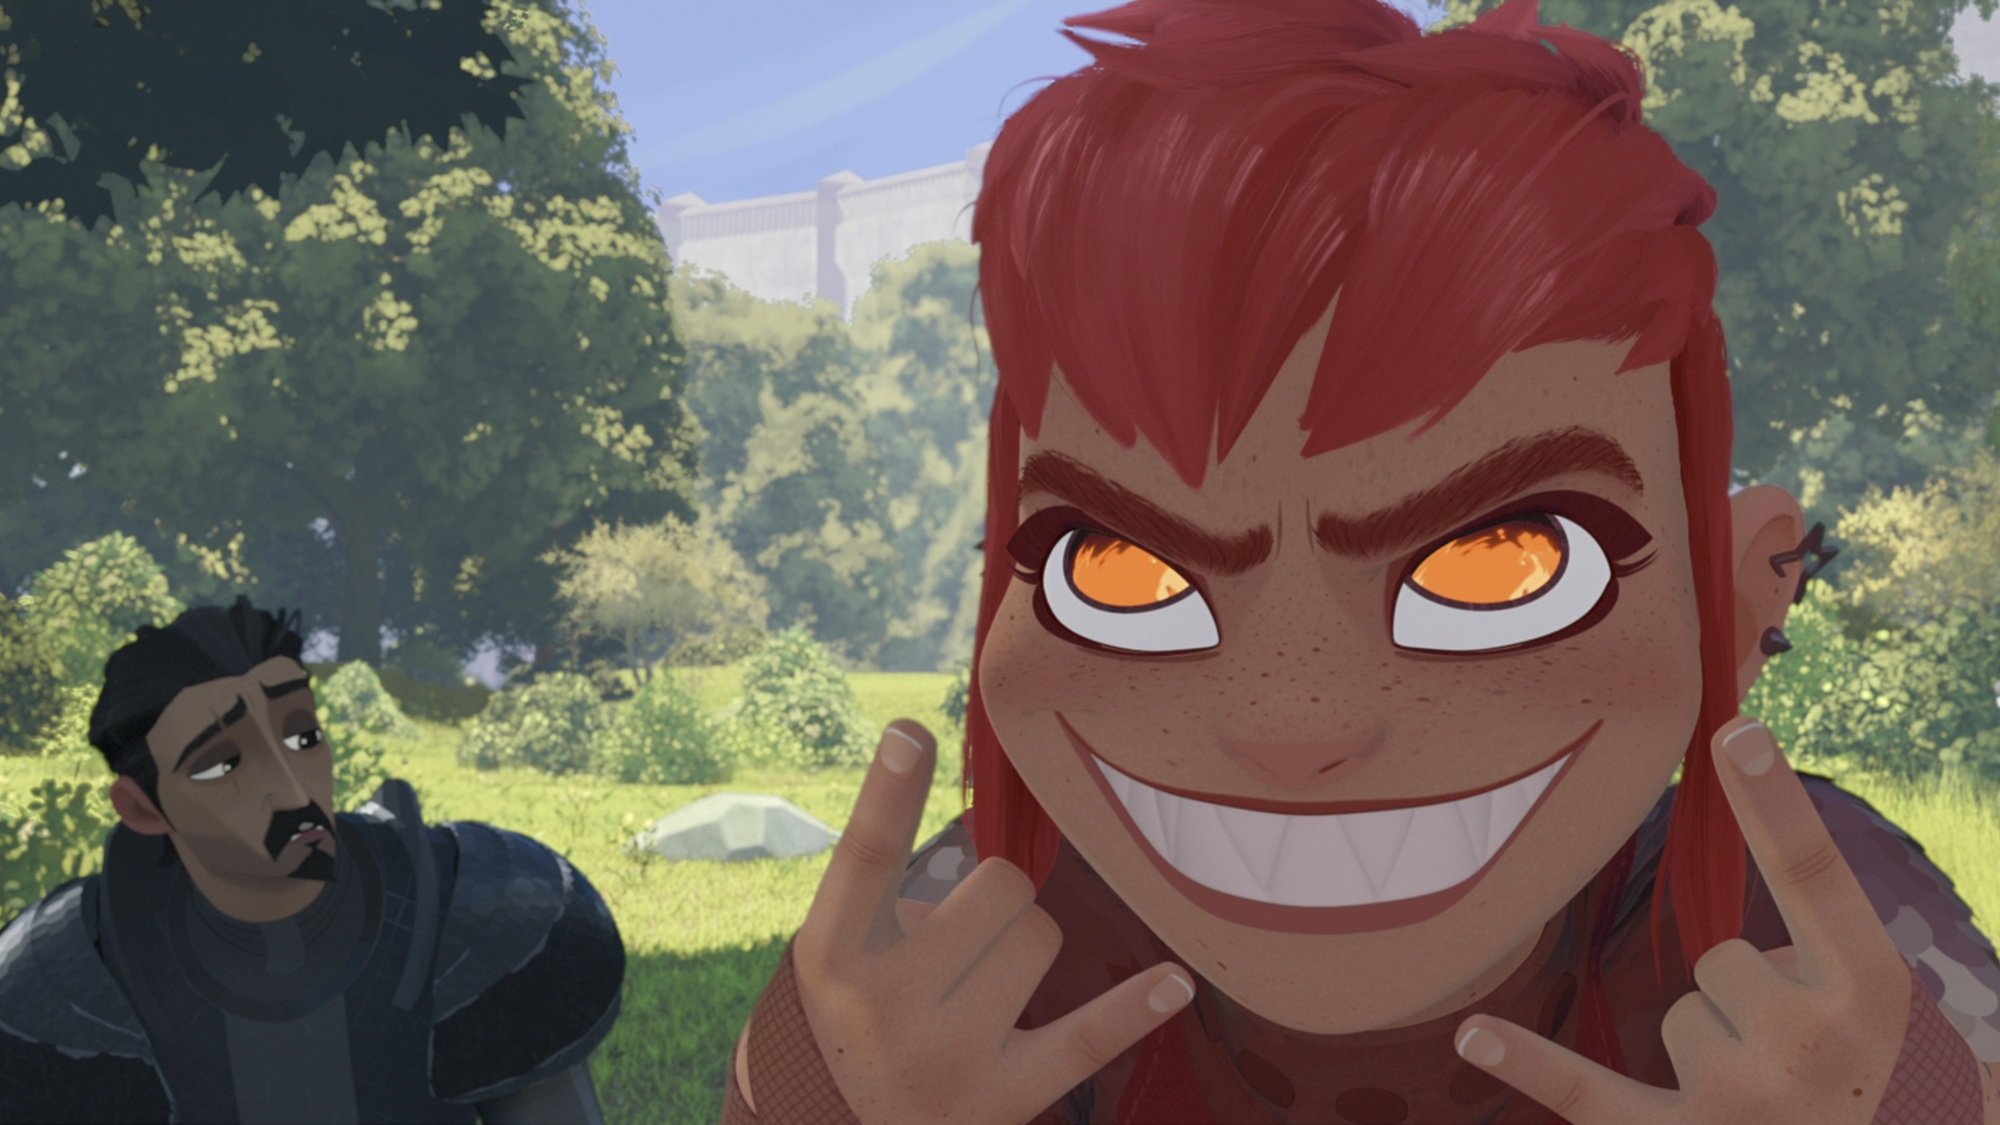 A knight in black armor sits on a grassy lawn while a young girl with pink hair makes punk signs with her hands and grins with fanged teeth and fiery eyes.